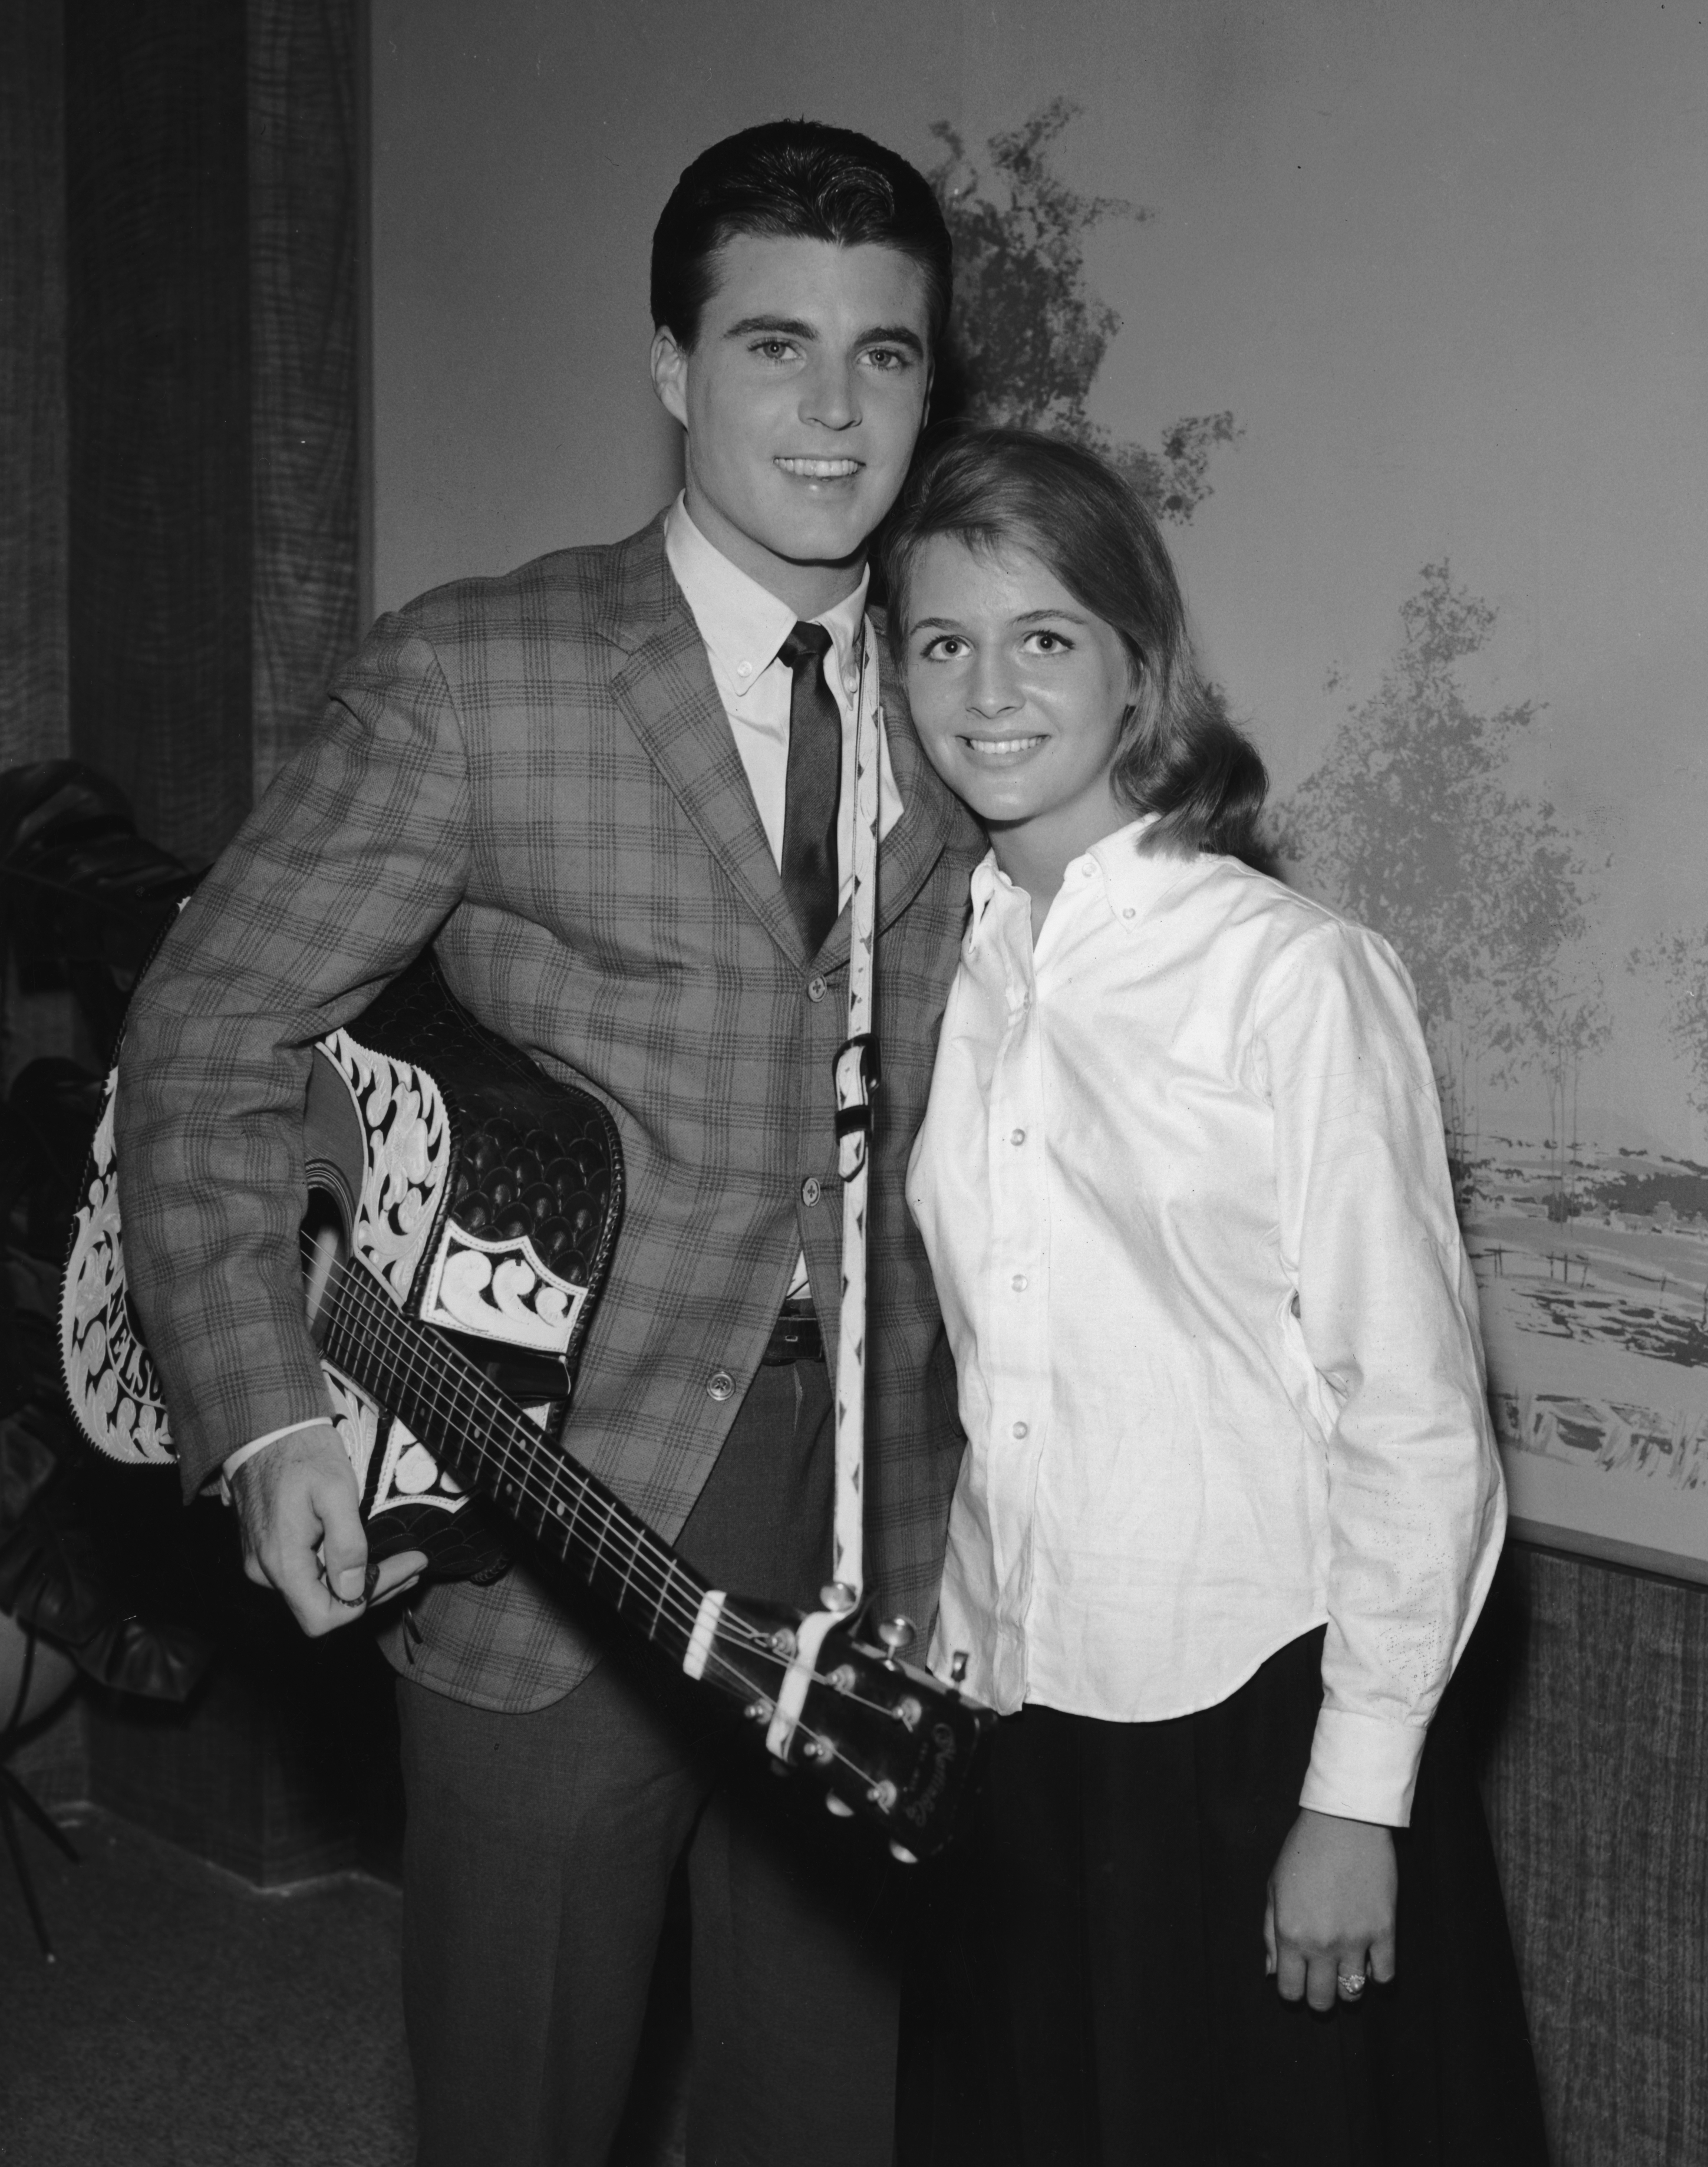 Singer Rick Nelson (1940-1985) smiles with his wife Kristin Harmon. He holds an acoustic guitar | Source: Getty Images